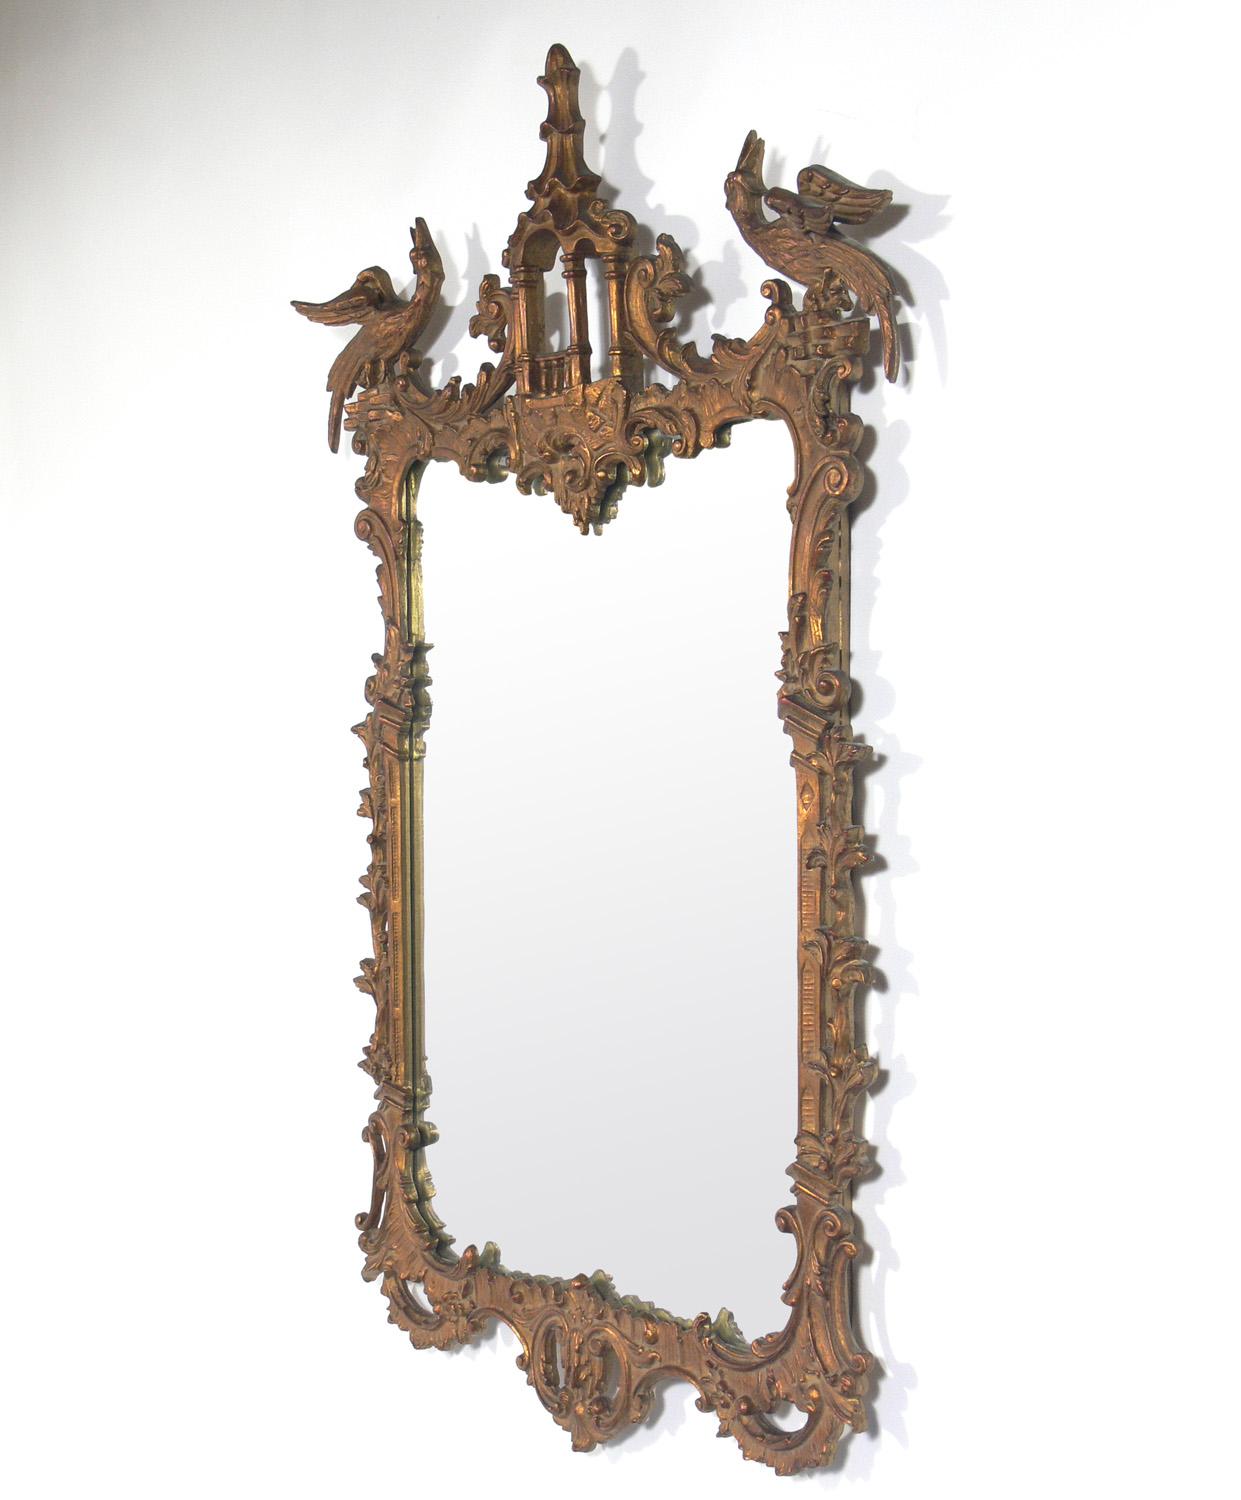 Chinese Chippendale or chinoiserie mirror, American, circa 1940s. It is constructed of gilt wood and gesso. Wonderful original patina to the gilt surfaces and the mirror.